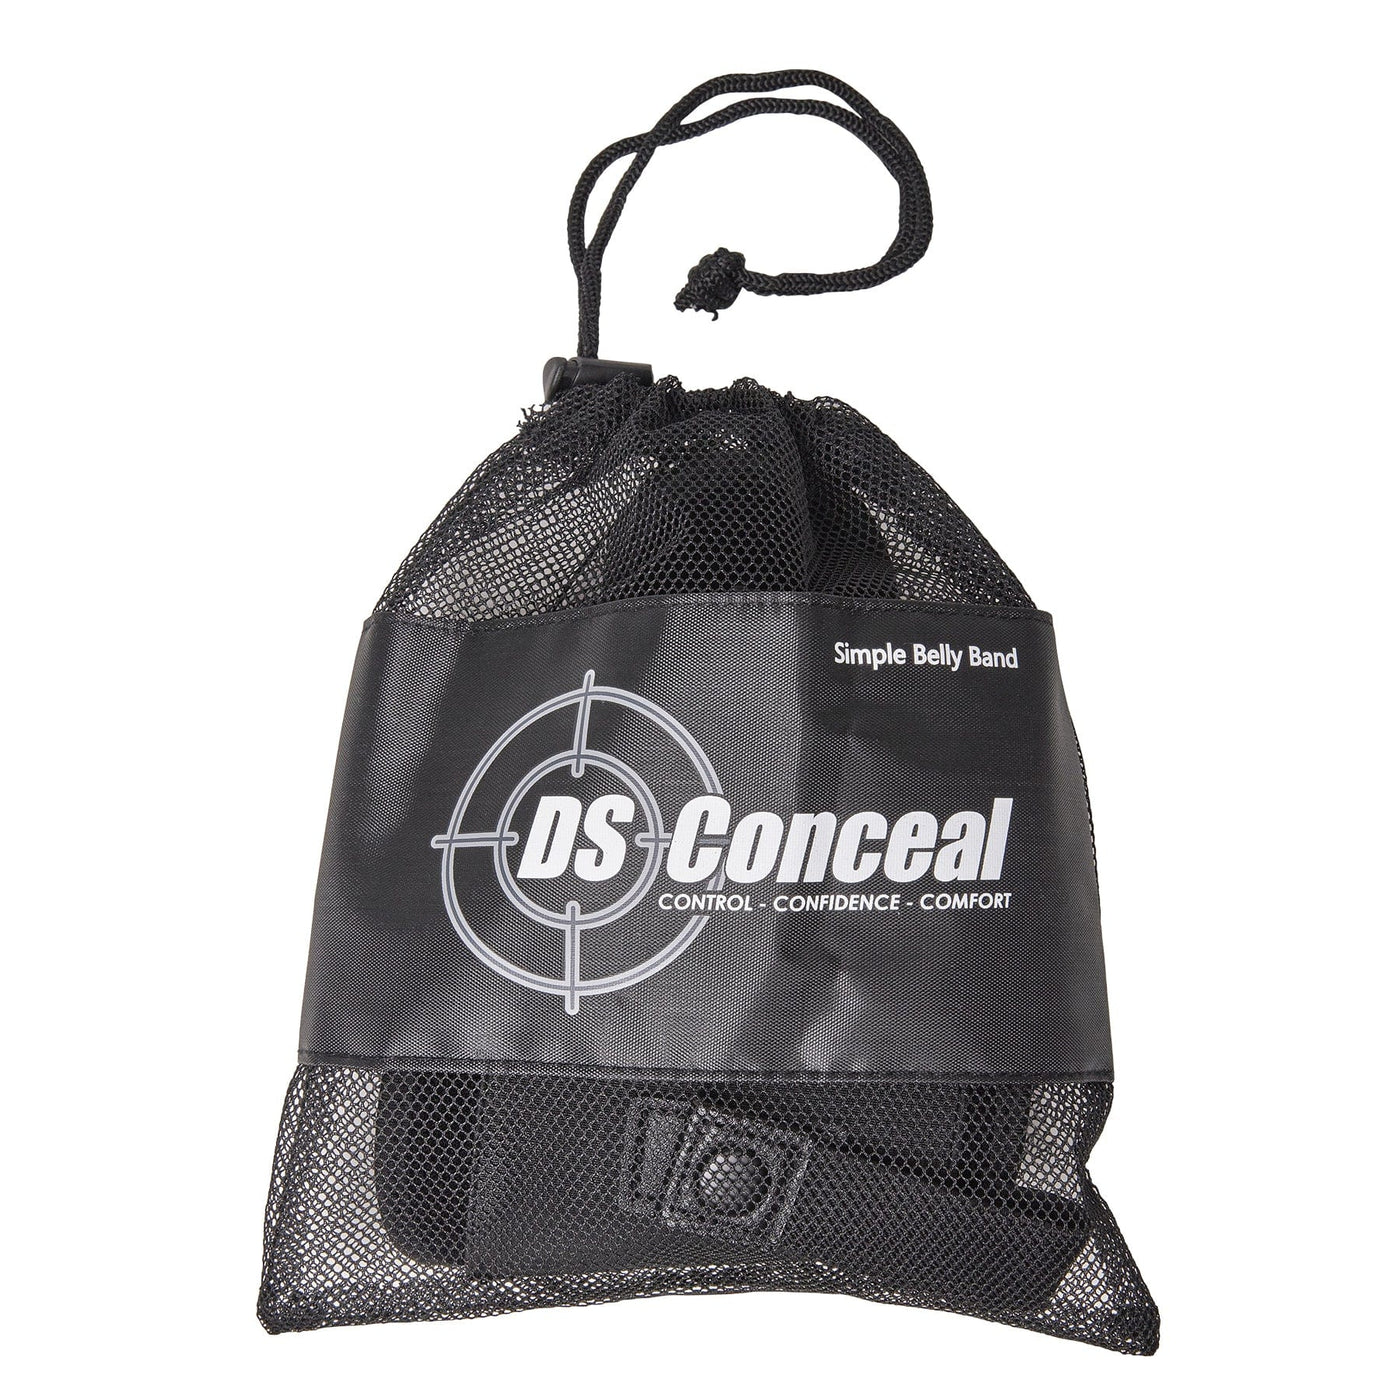 Unisex Simple Belly Band by DS Conceal -  Fast Draw Gun Holster for women and men Unisex -  Unisex Simple Belly Band -  DS Conceal Fast Draw Gun Holster -  Leather Belly Band pistol bag -  Tactical womans purse for pistol -  Concealed Belly Band -  most popular crossbody bag -  crossbody handgun bag -  crossbody bags for everyday use -  Lady Conceal - 